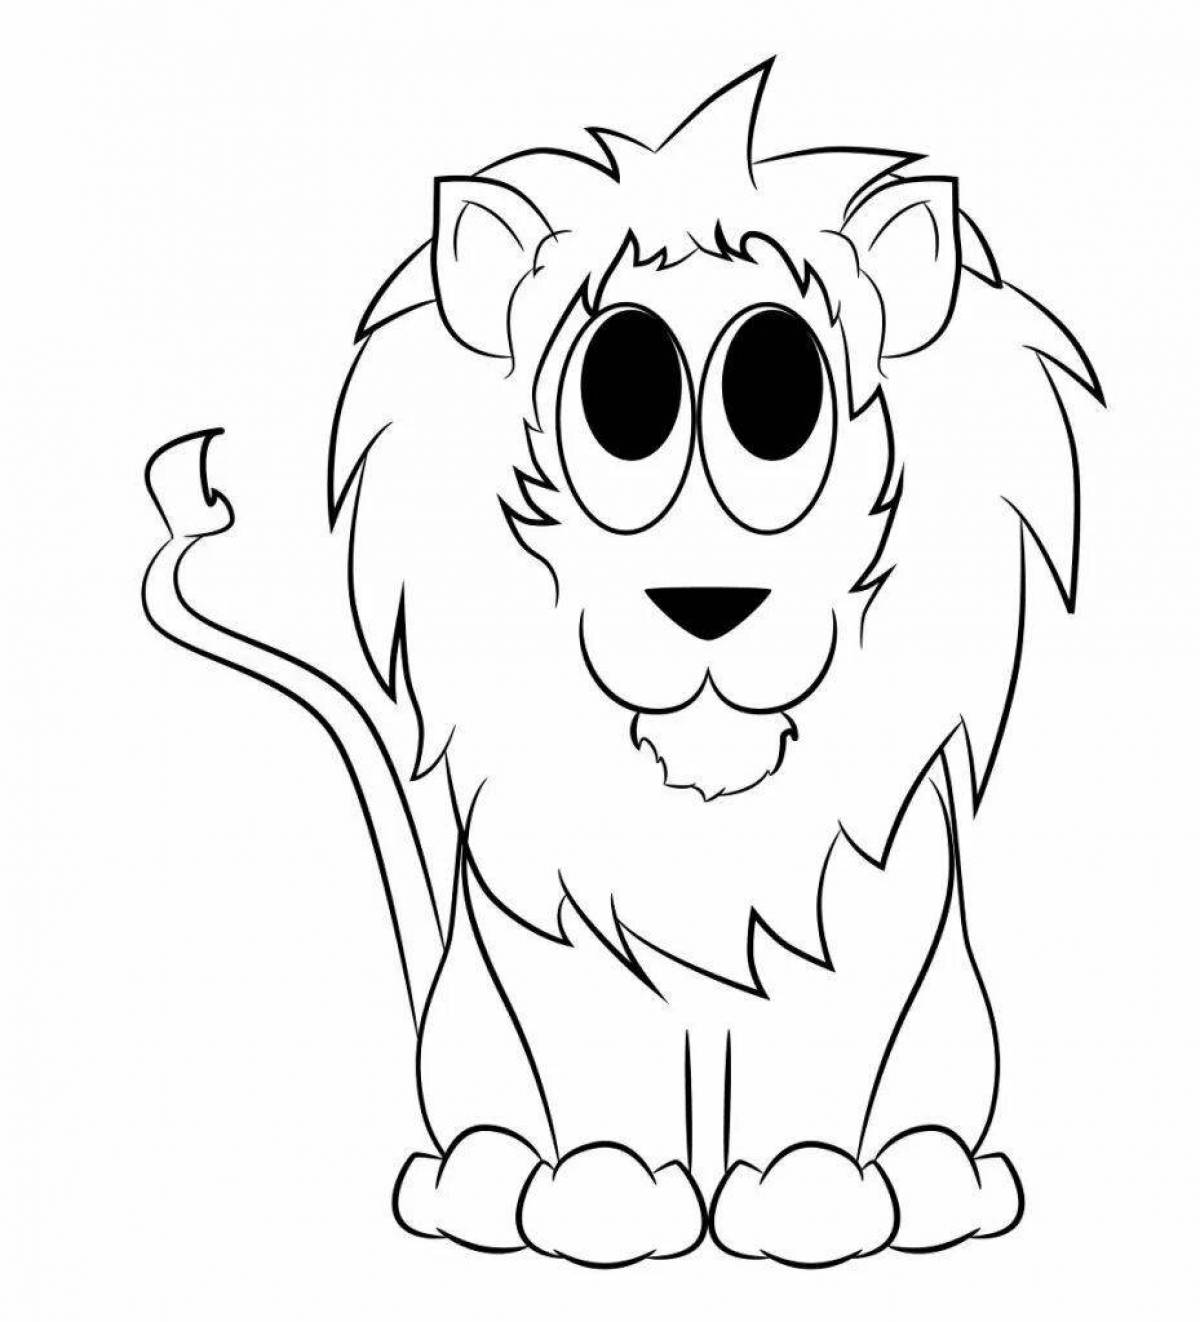 Fun lion coloring for little ones